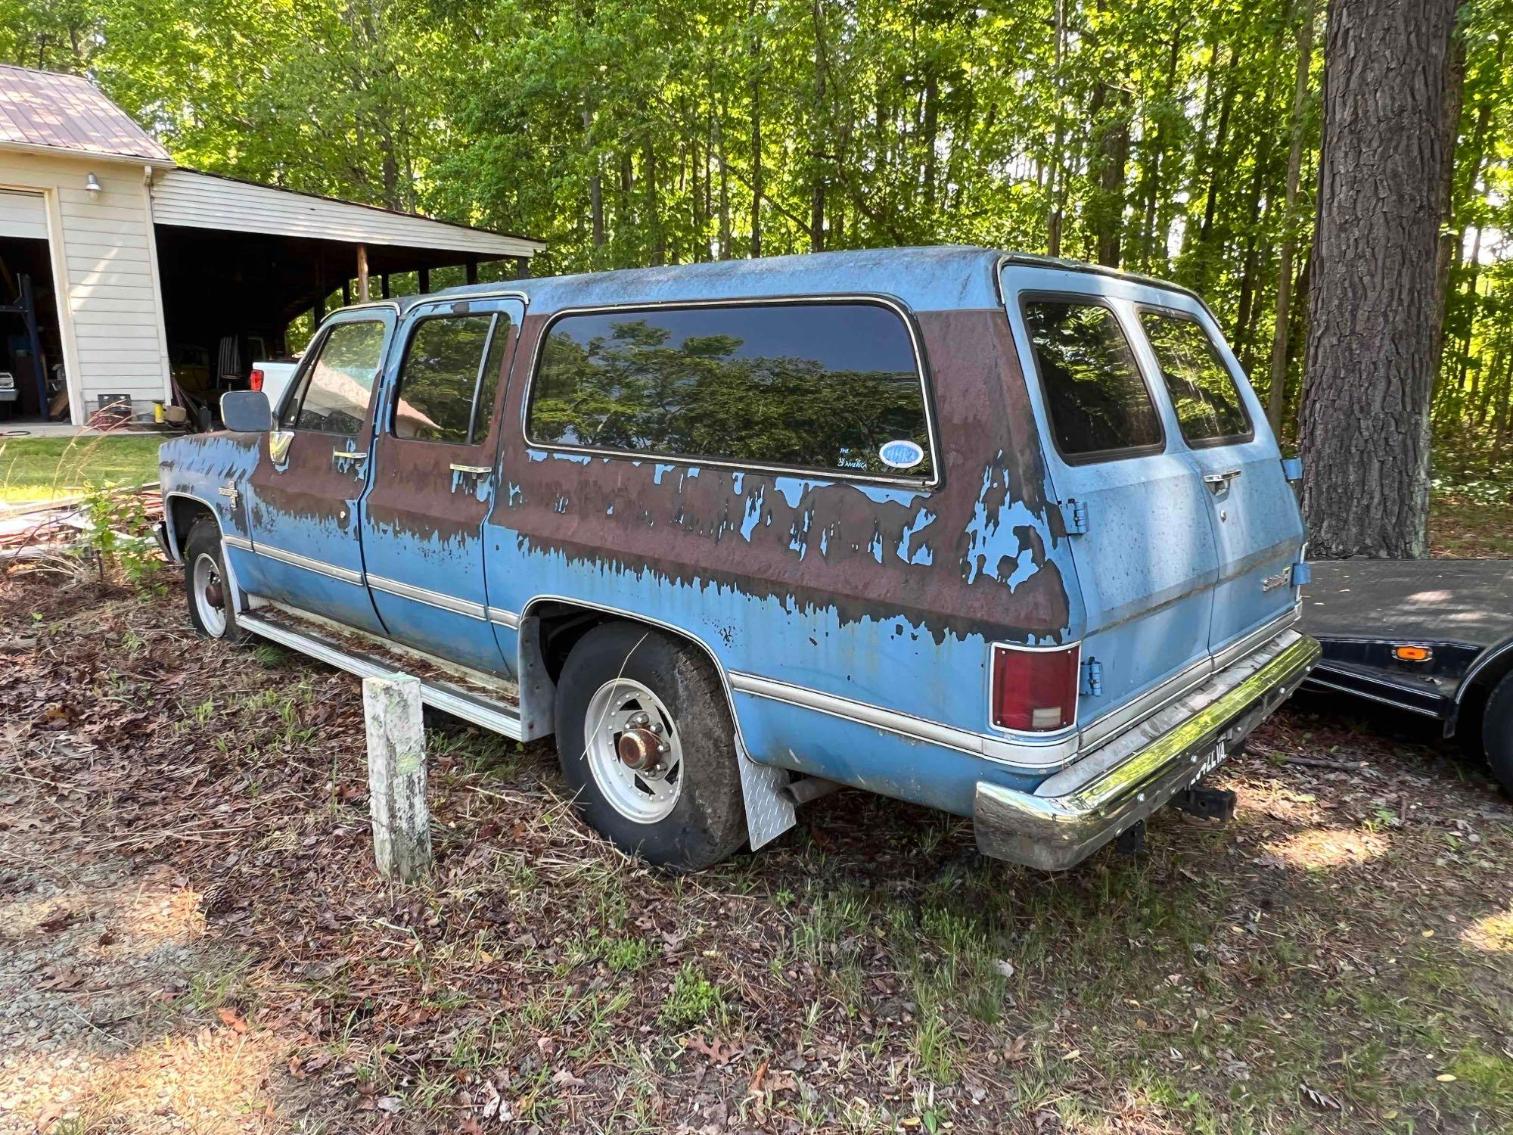 Image for 1986 Chevrolet Suburban (MPV), VIN # 1G8GC26WXGF208305 Mileage Showing: 25,289 nw/Title 